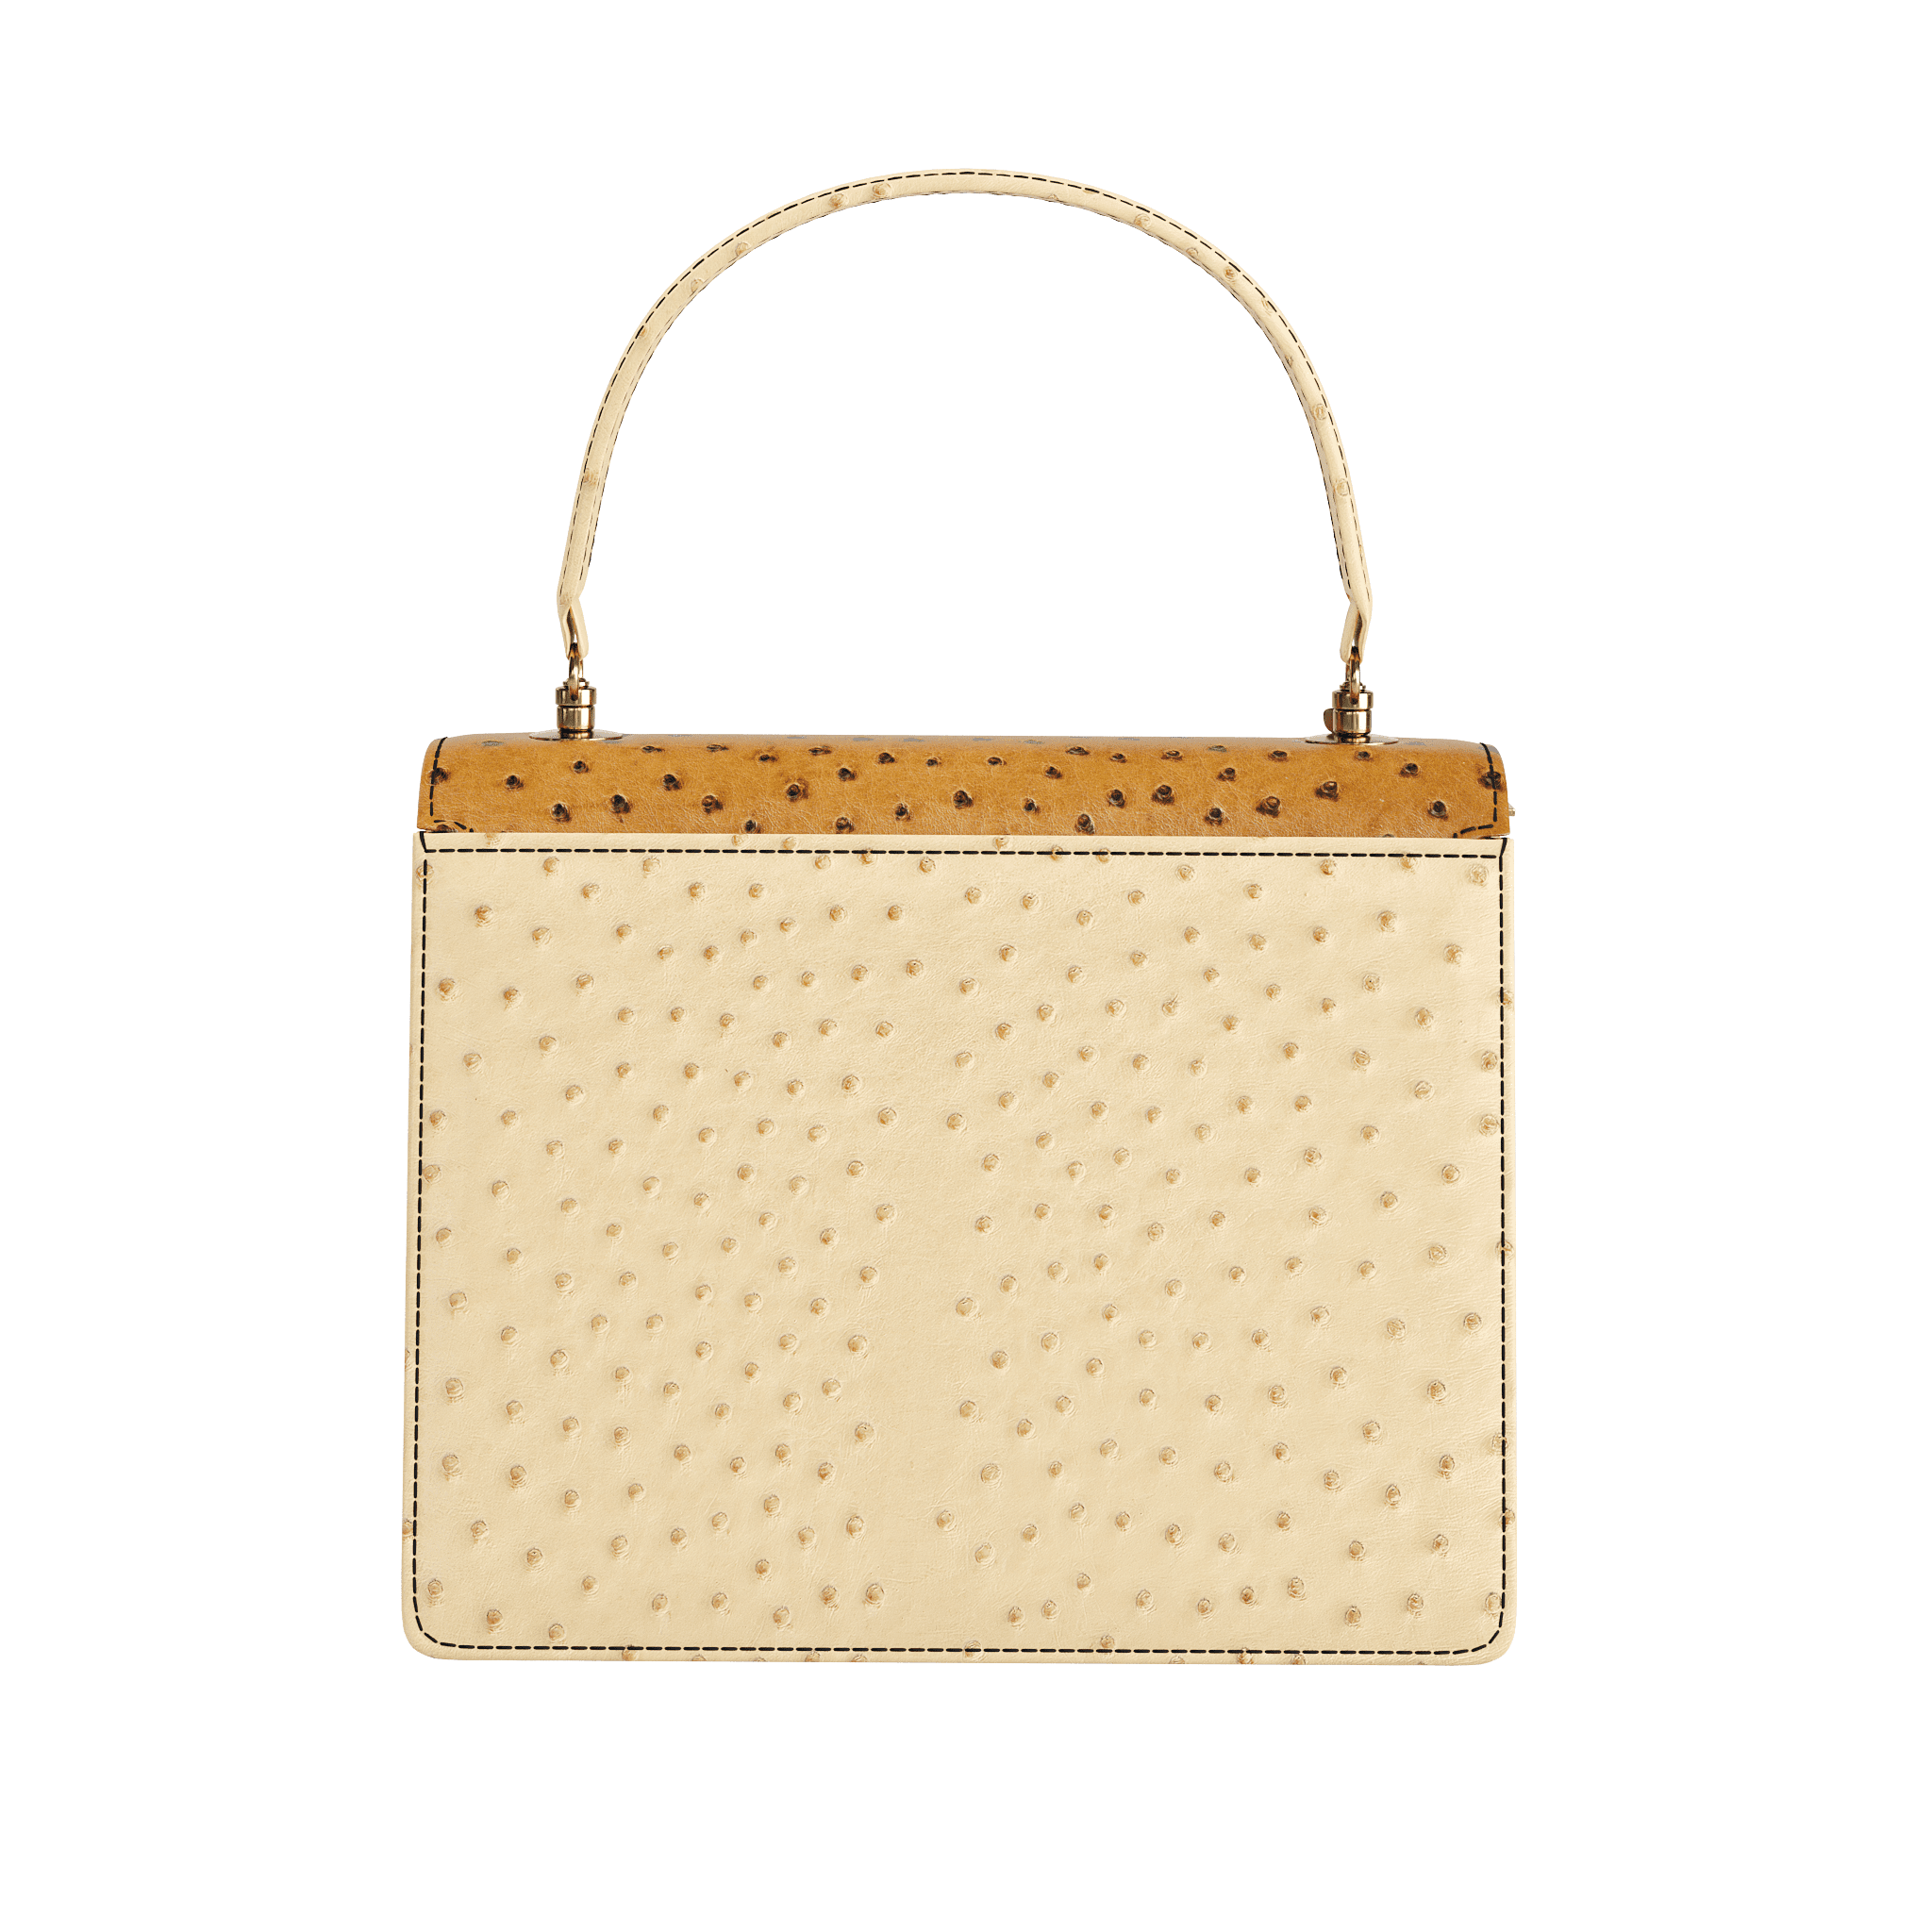 Luxury Two Tone Ostrich Handbag With Modern Style